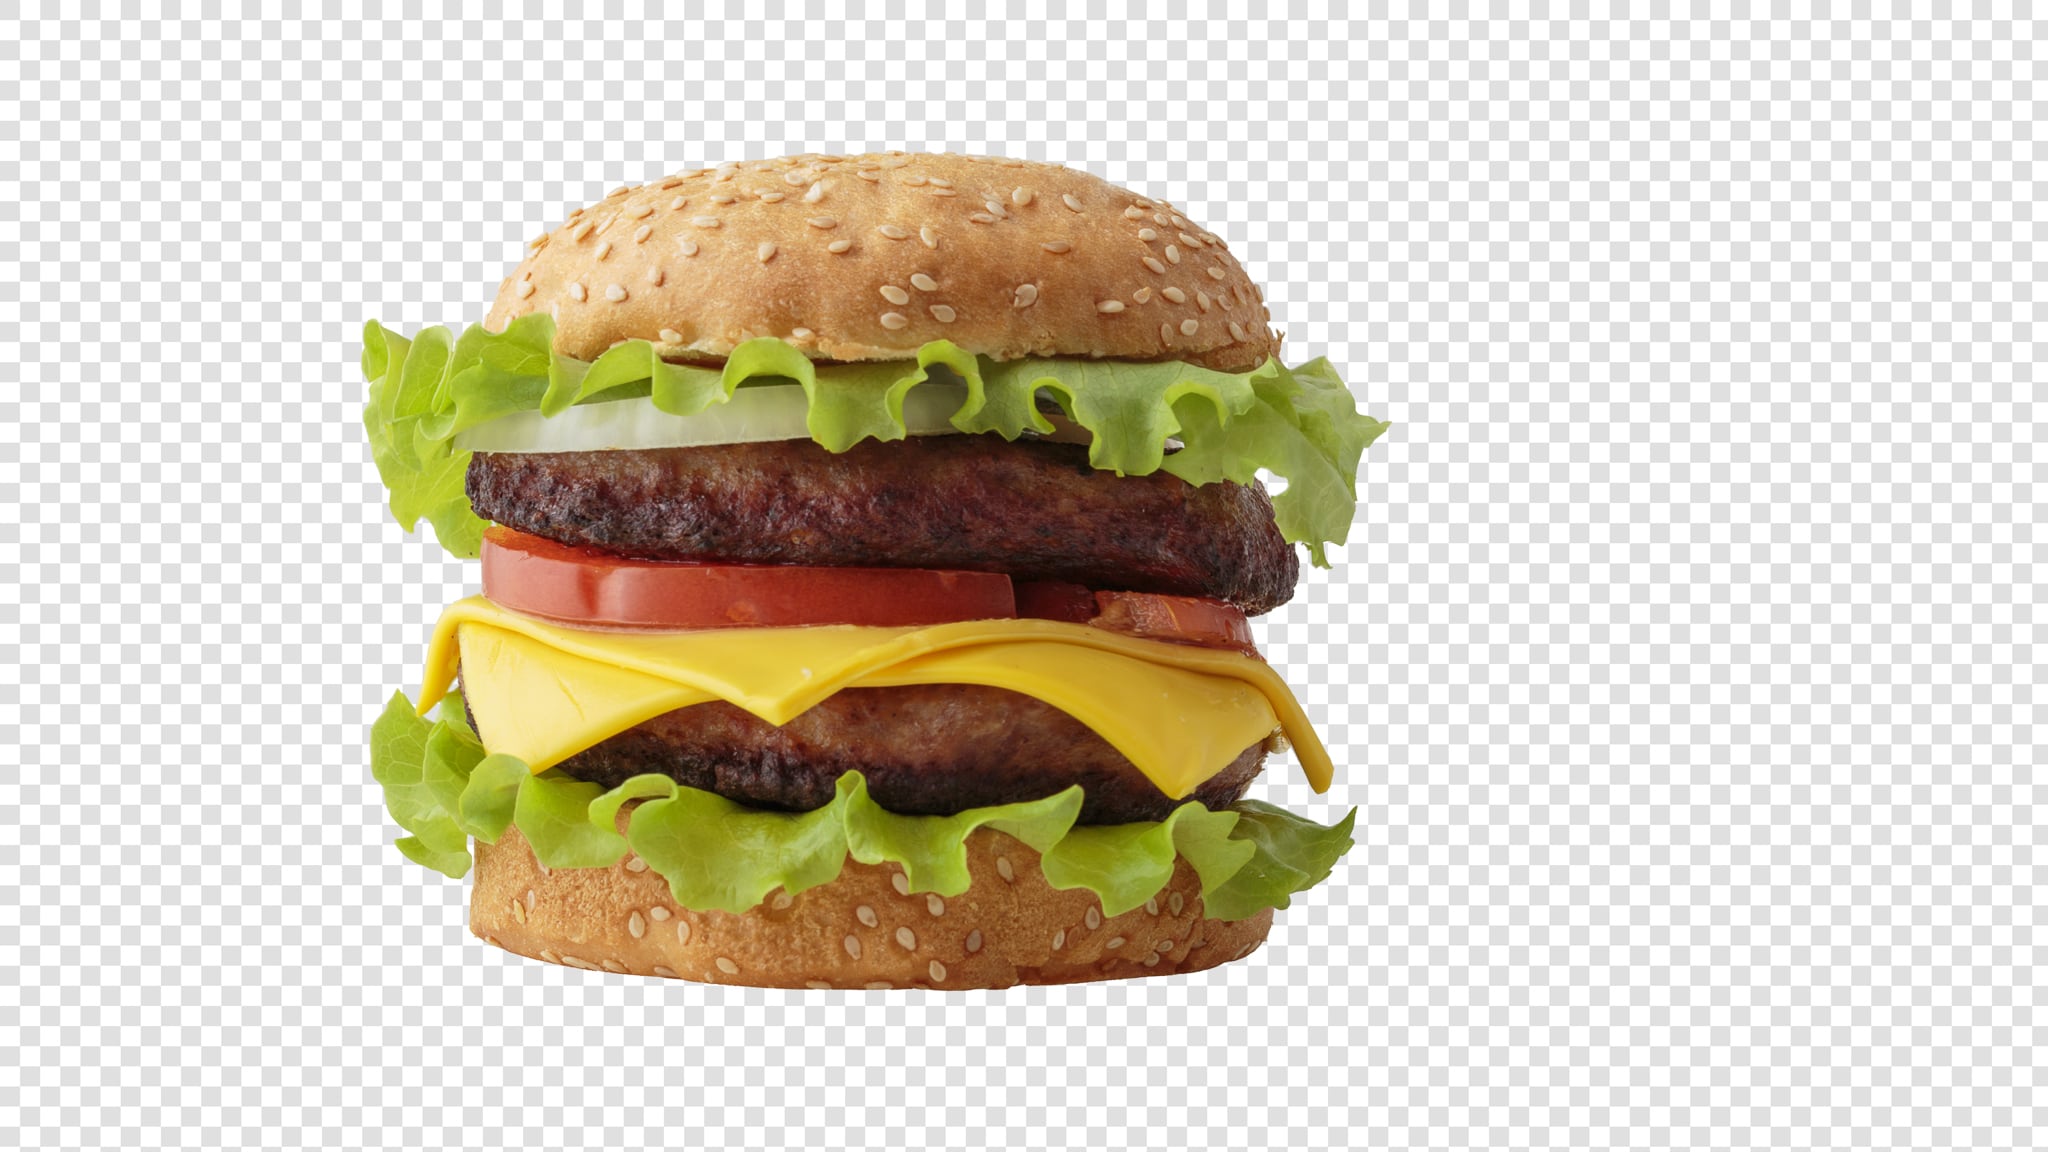 Burger PSD isolated image